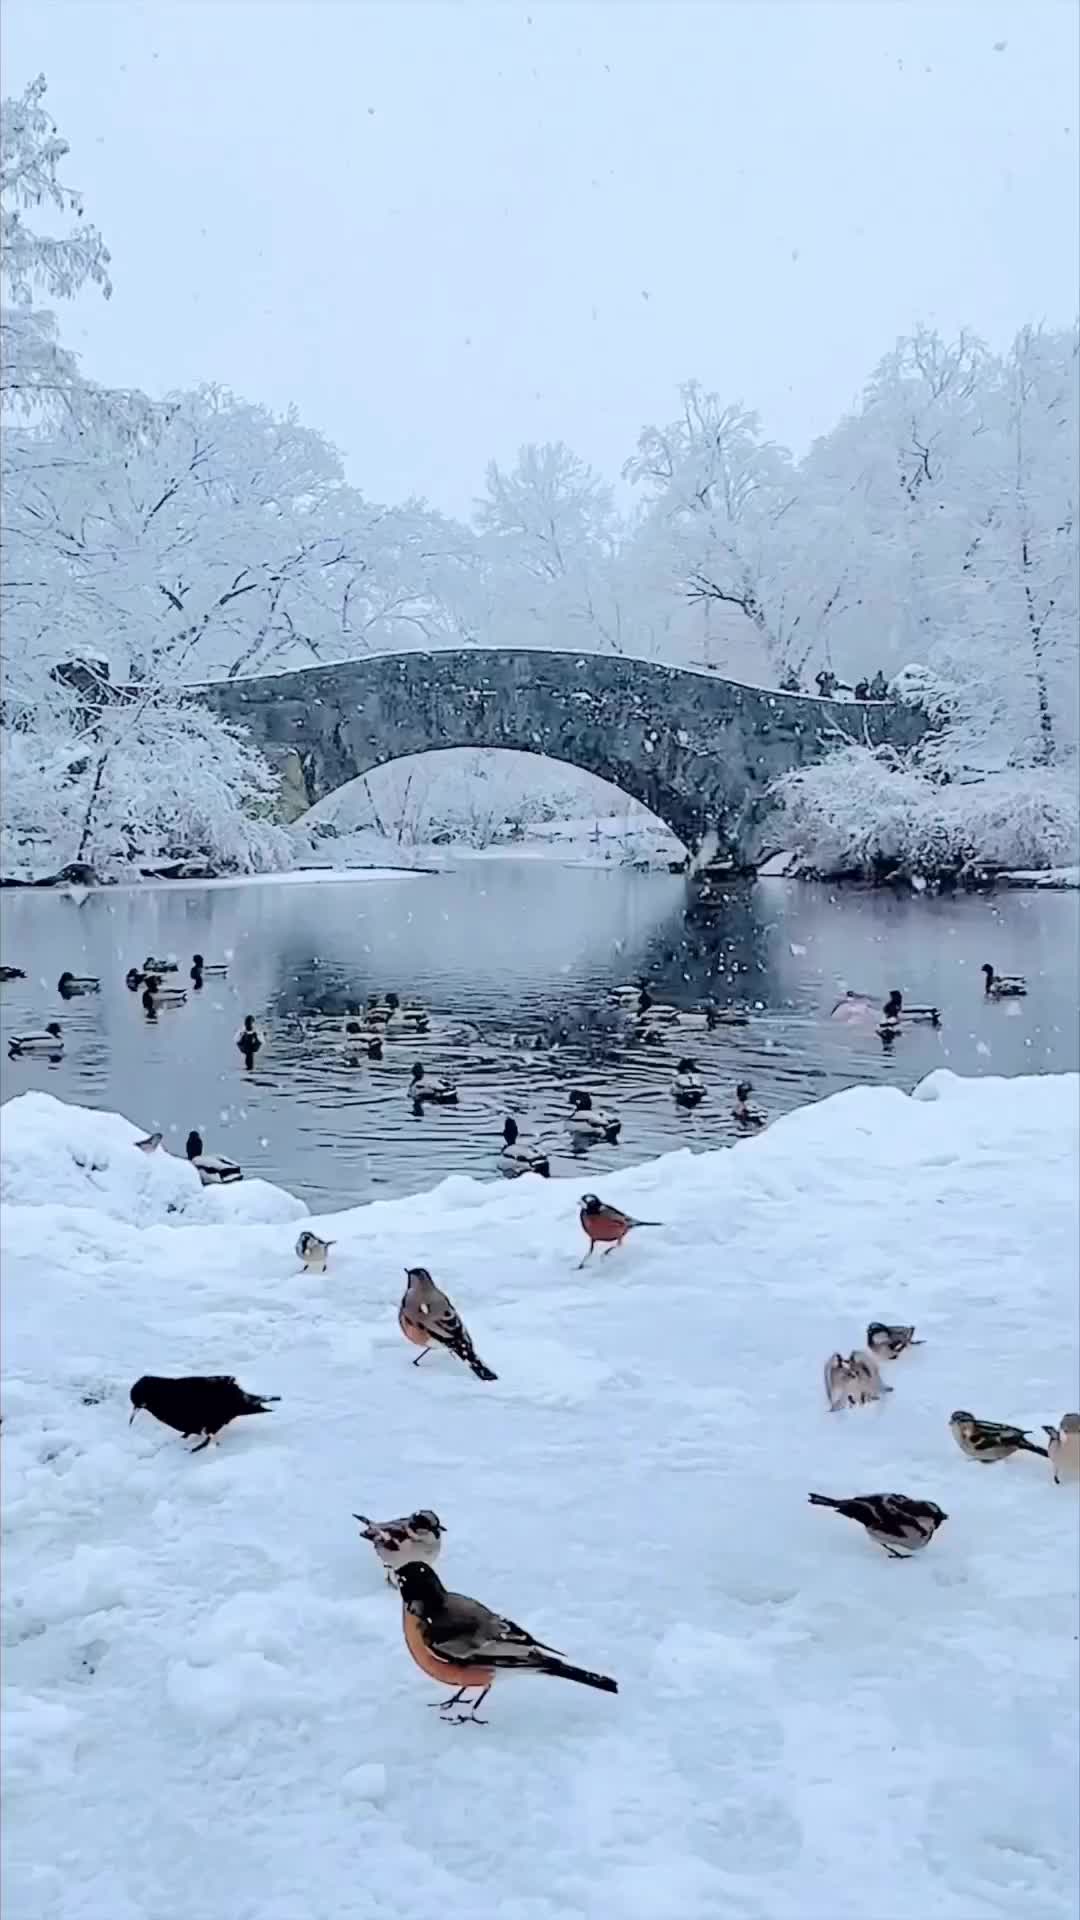 Wintry Central Park Morning: A Snowy Paradise